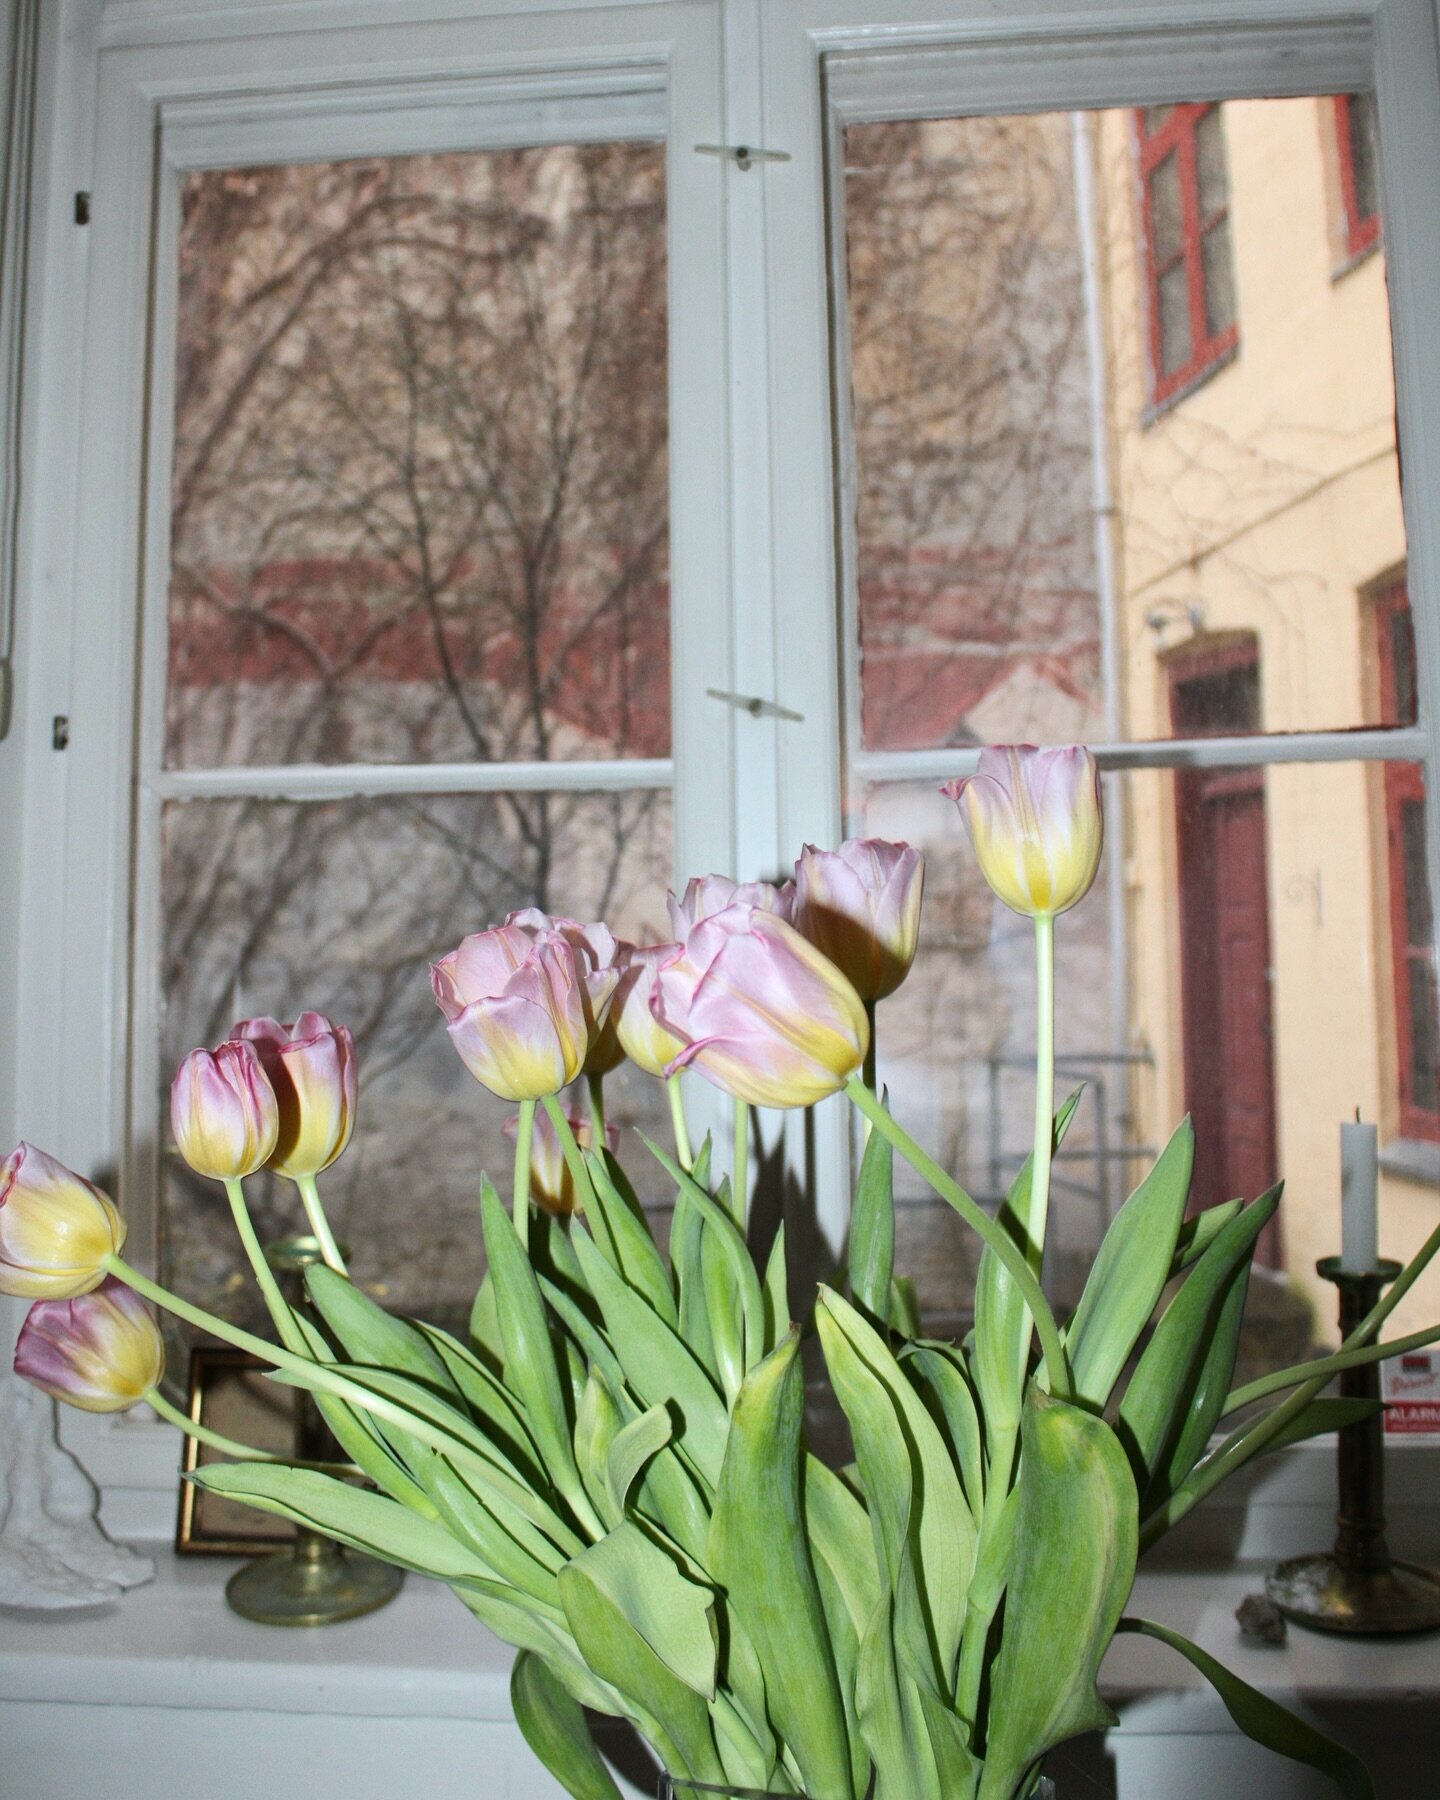 Tulips show that spring is coming soon and give us something to be excited about. Love Alexandra 🌷

#AMOHRJEWELLERY